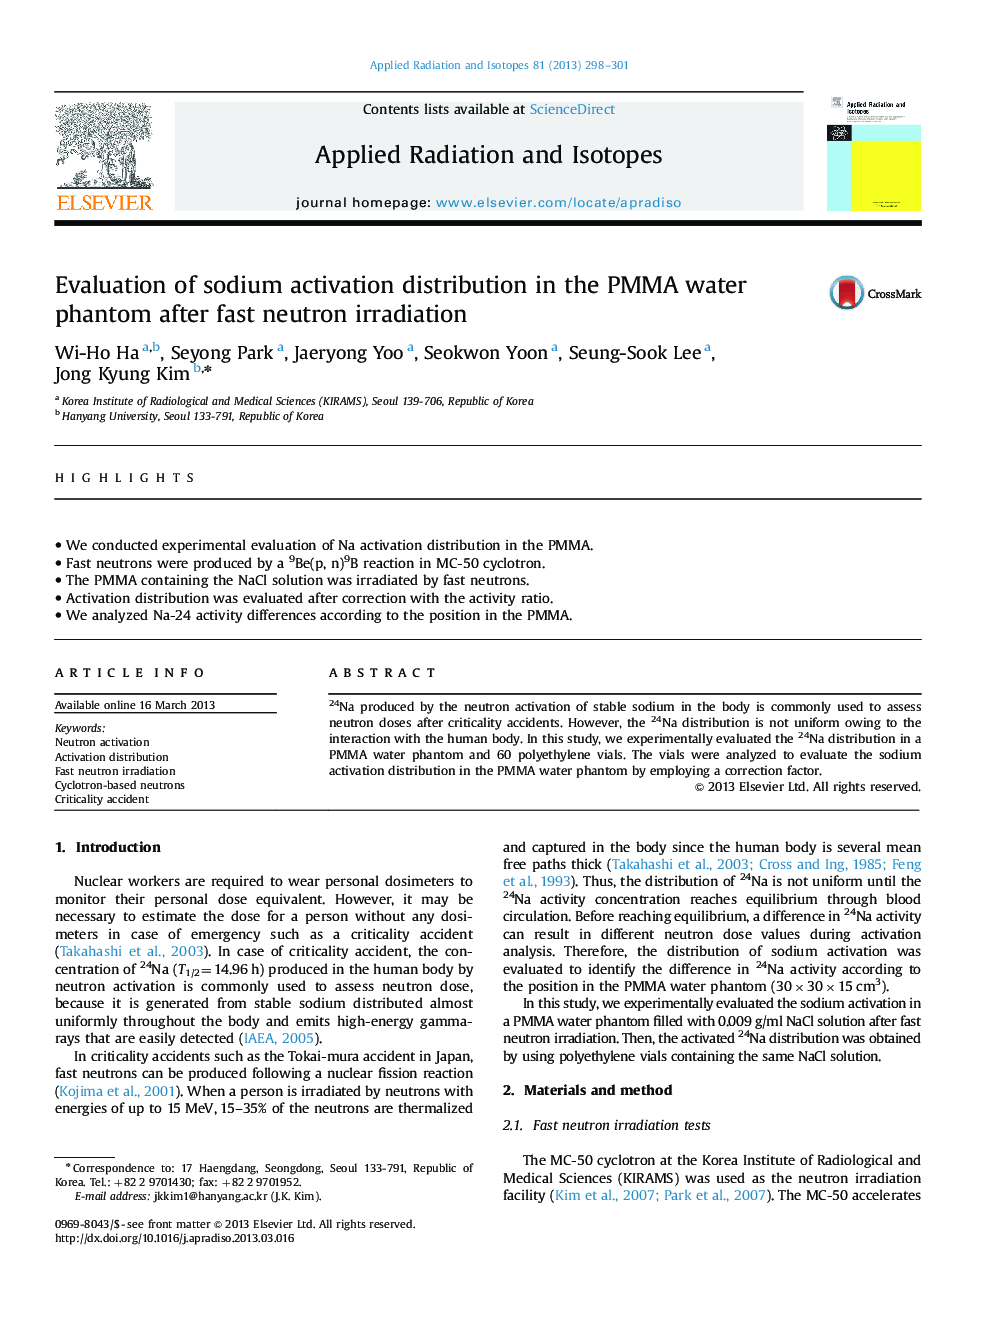 Evaluation of sodium activation distribution in the PMMA water phantom after fast neutron irradiation